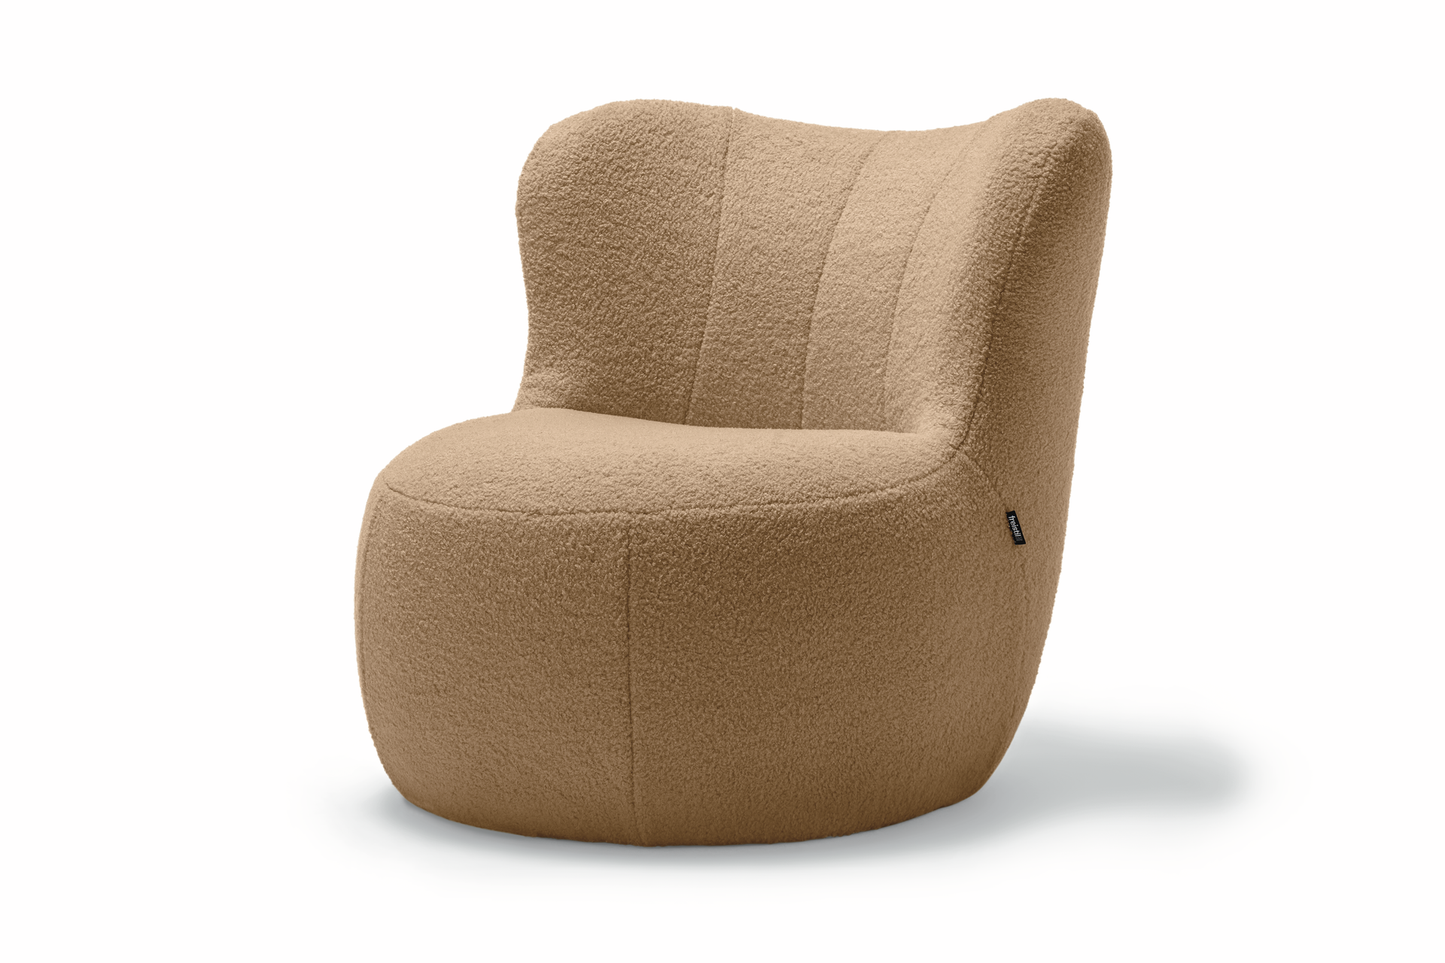 Freistil by Rolf Benz 173 Lounge Chair and Ottoman